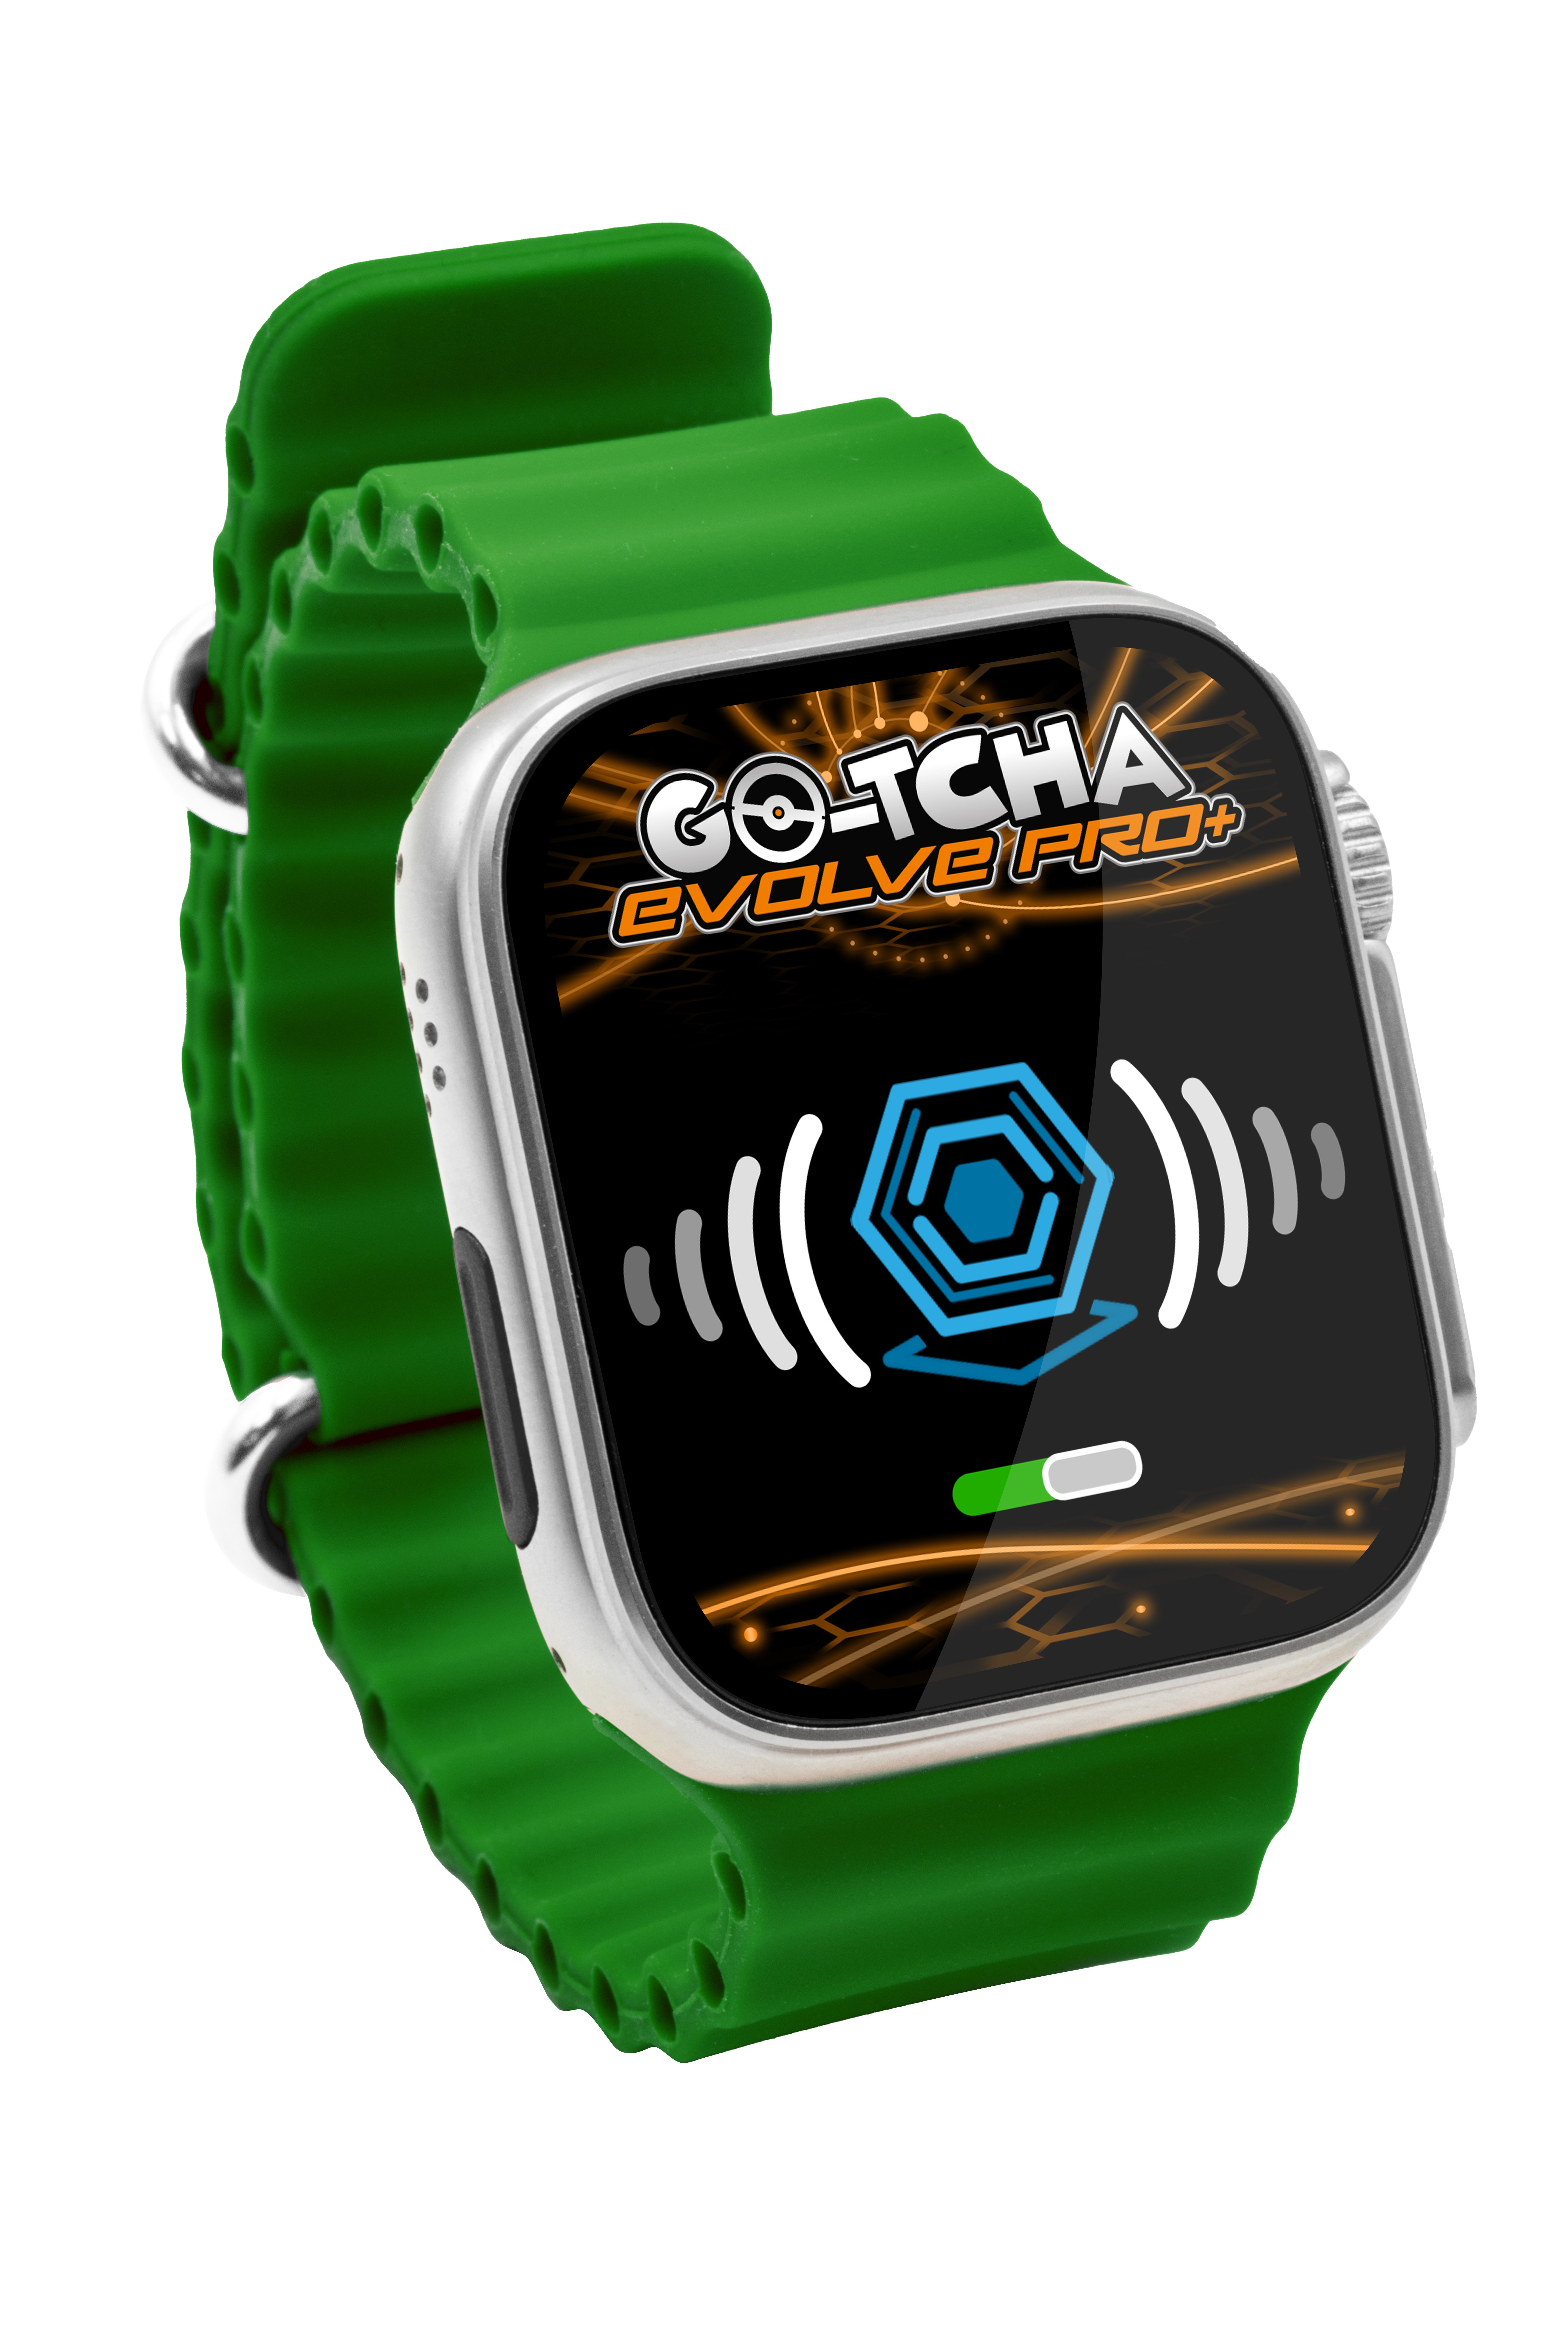 GOTCHA Waterproof Surf watches from... - Gotcha South Africa | Facebook